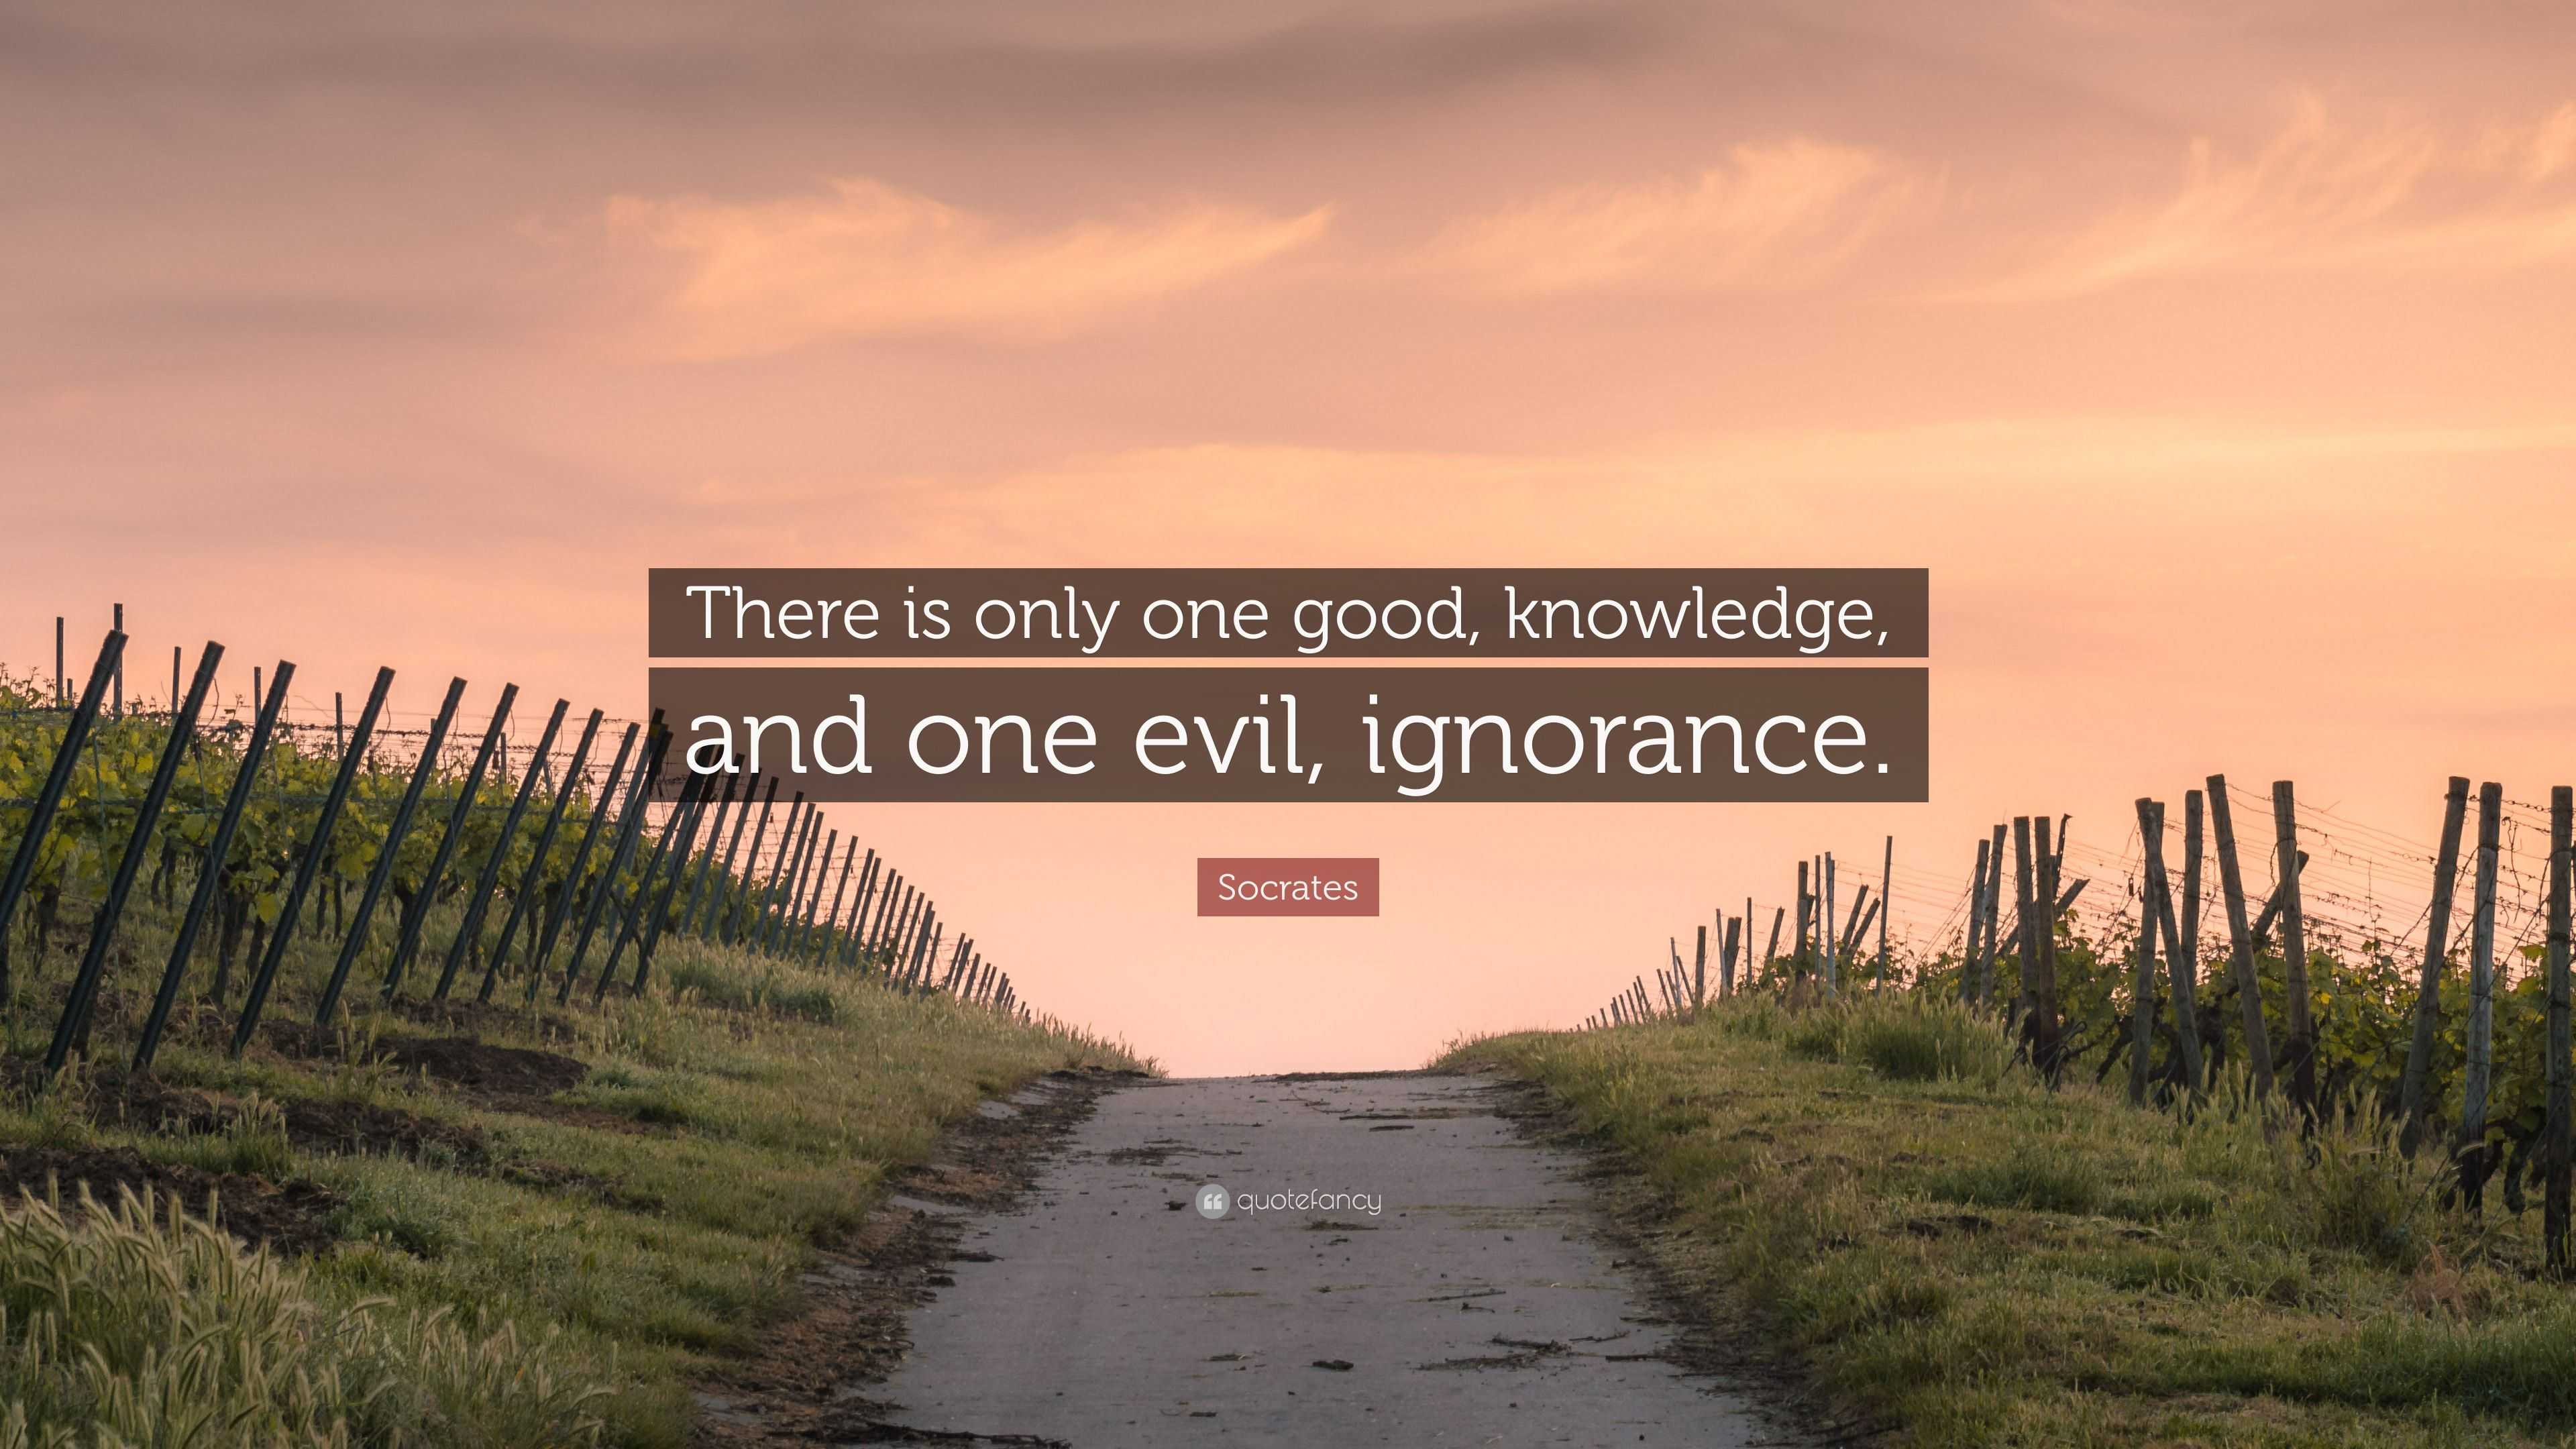 Socrates Quote: “There is only one good, knowledge, and one evil